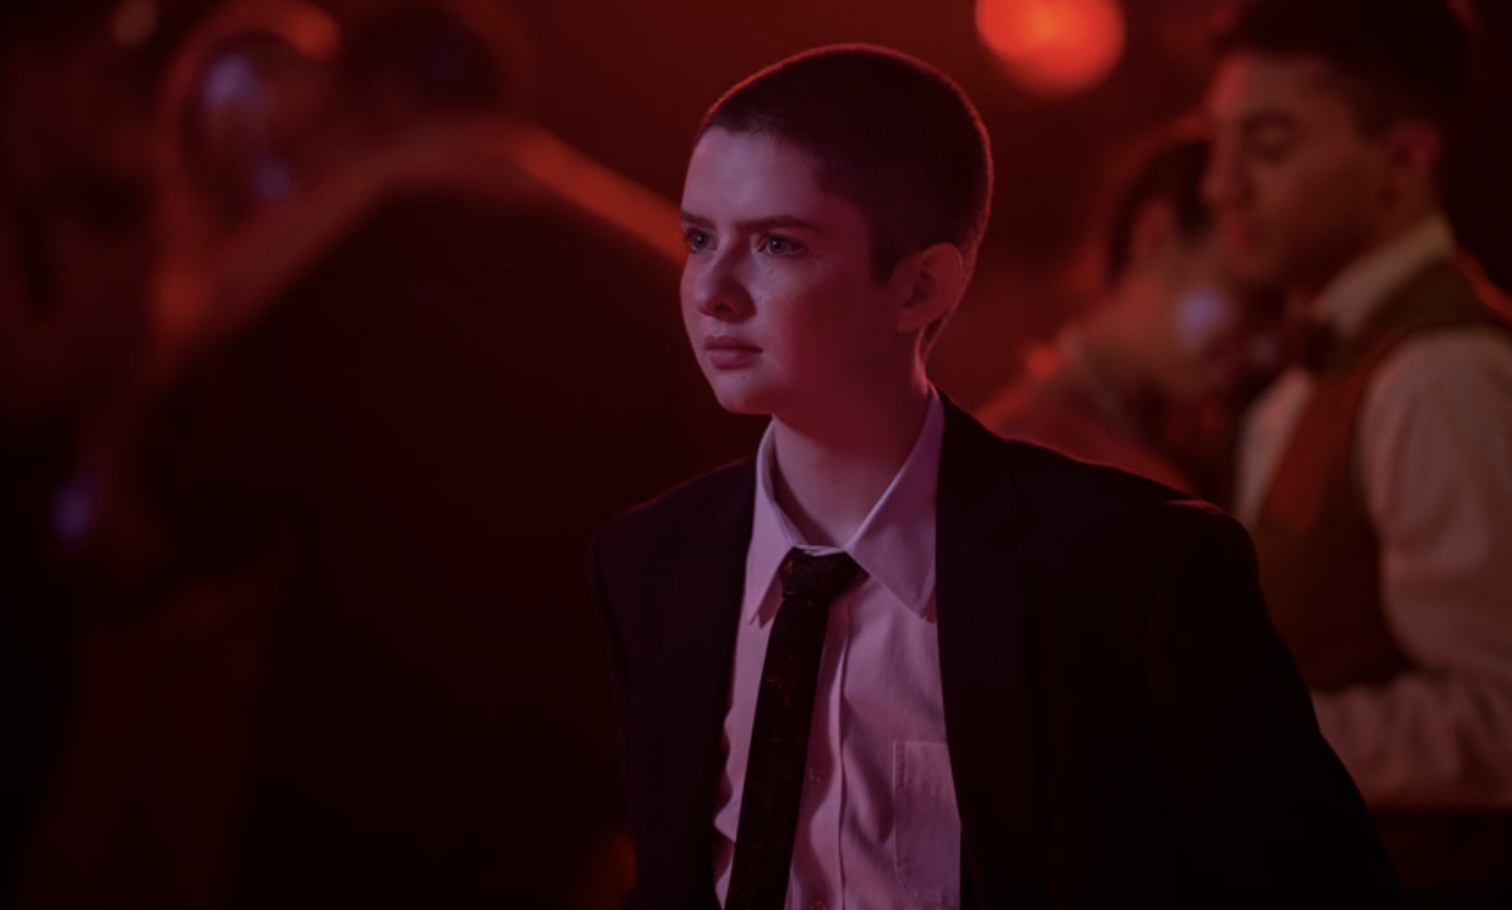 Theo Putnam, portrayed by nonbinary actor Lachlan Watson